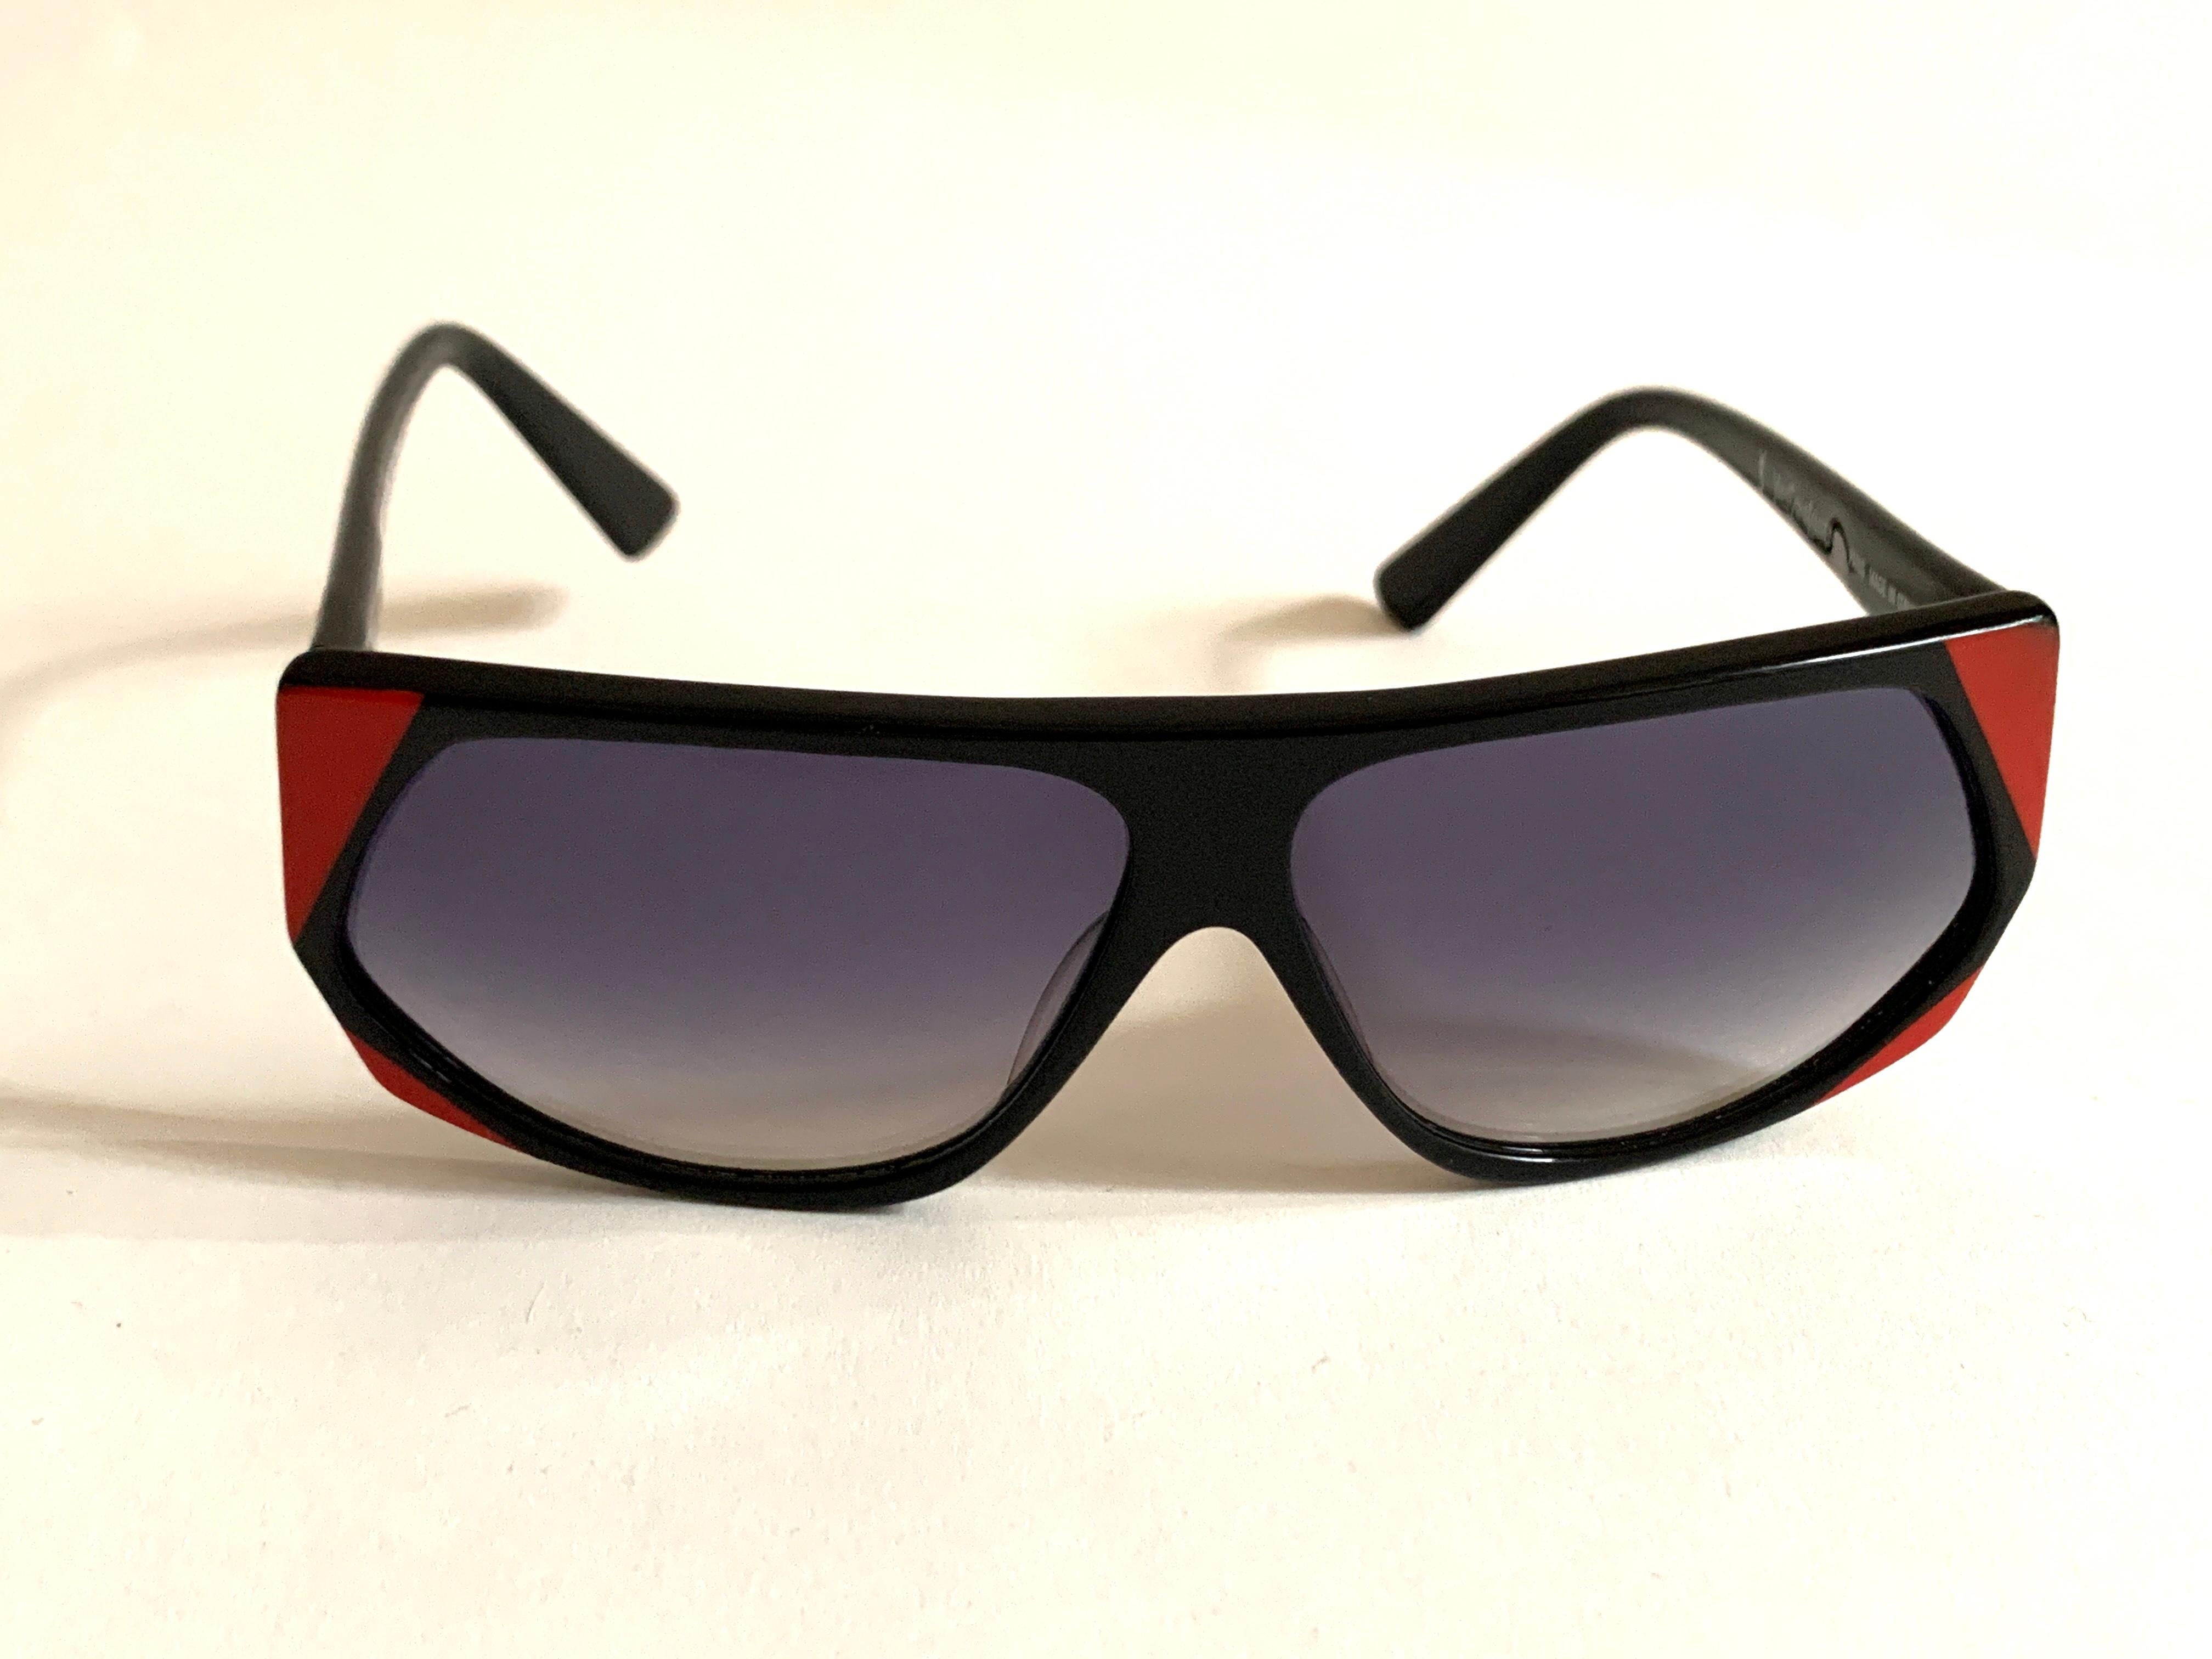 Vintage 1980s Yves Saint Laurent geometric sunglasses in black plastic with red detail at corners and sides. Grey lenses. Gold YSL logo at right temple. From the Museum at FIT.

Frame measures approximately 5 3/8